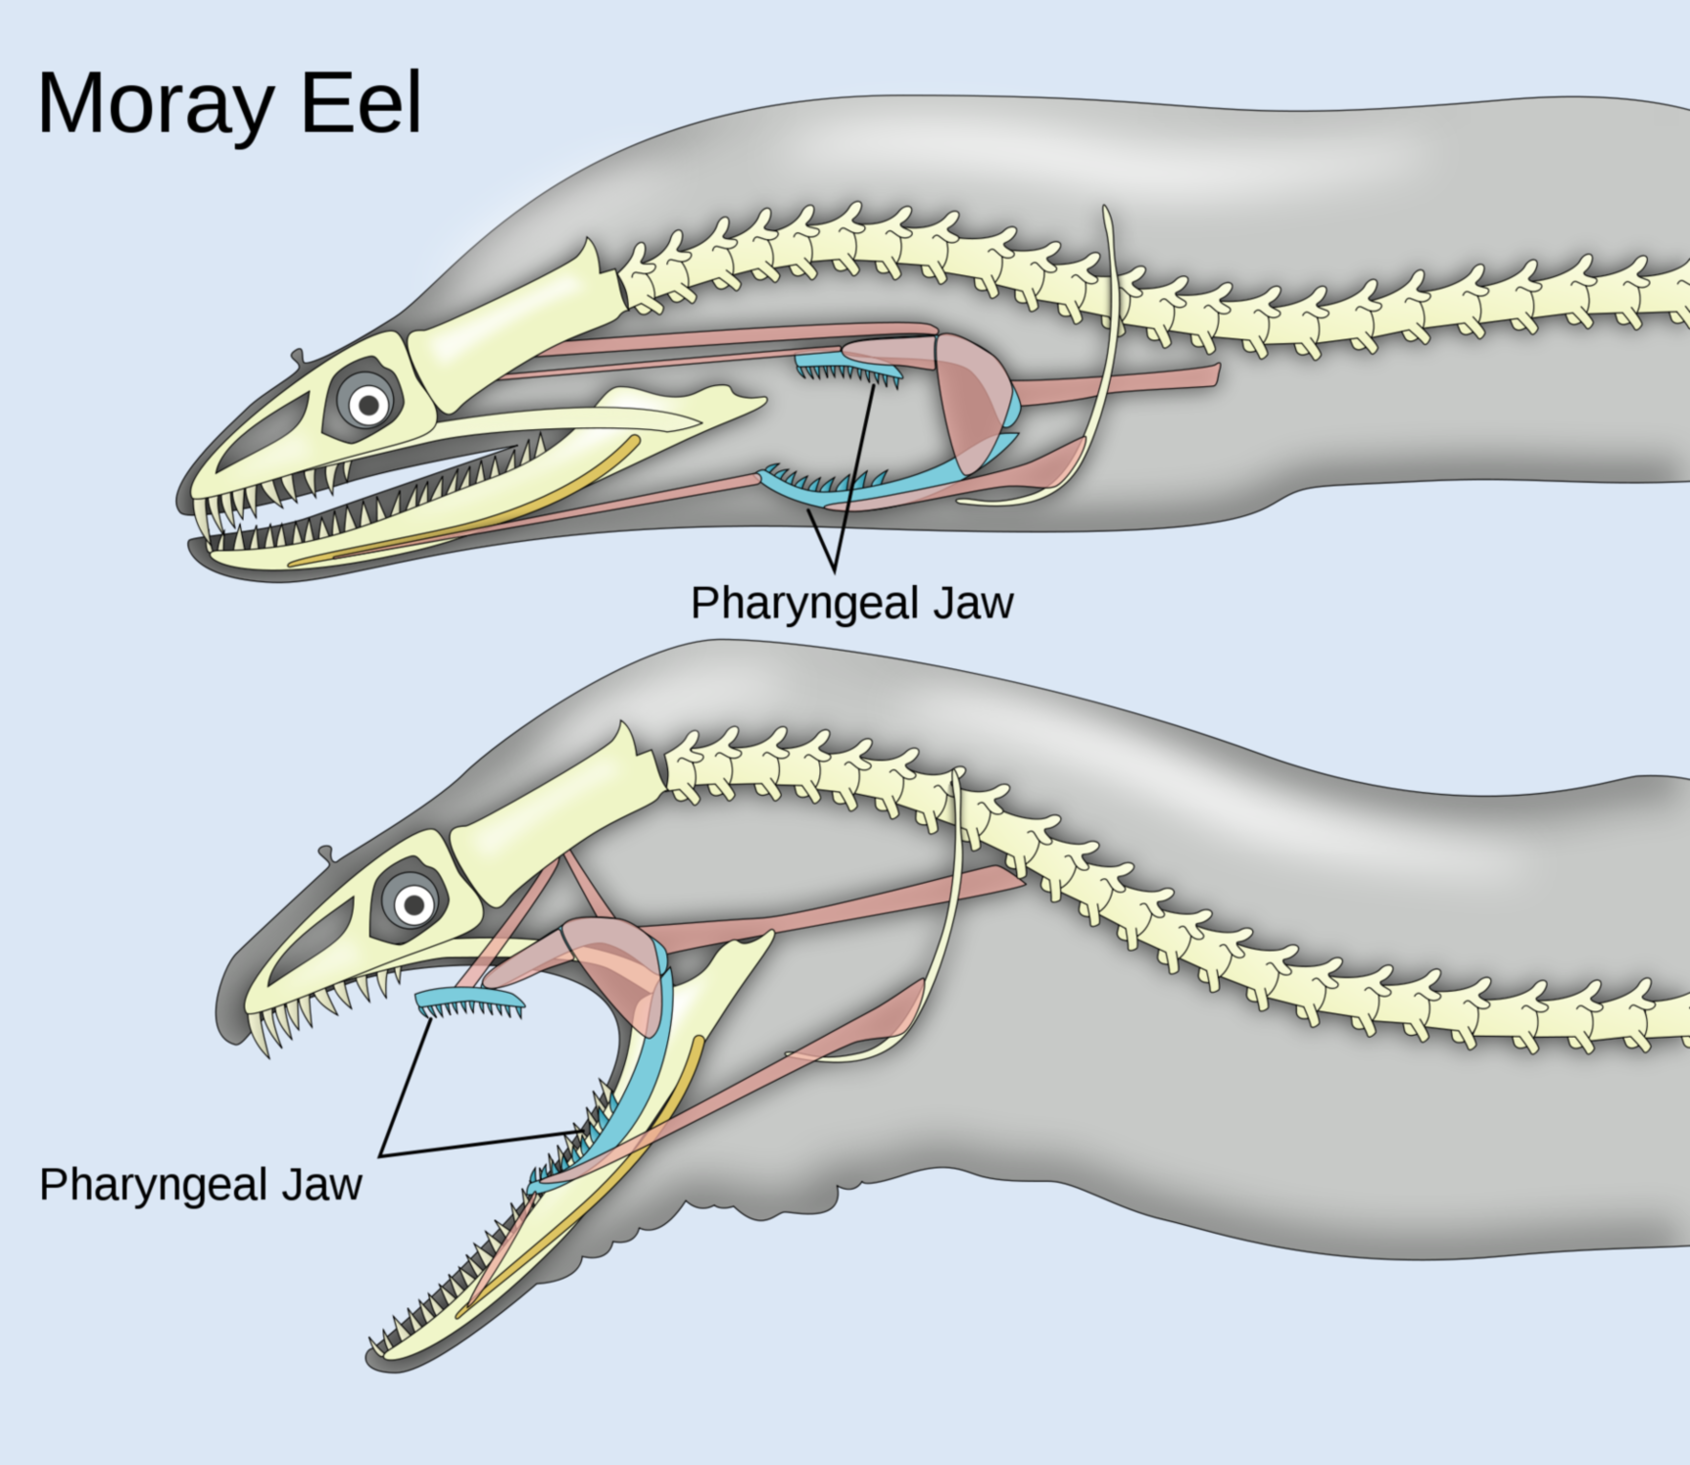 This image show how moray eel open its mouth using its pharyngeal Jaw.